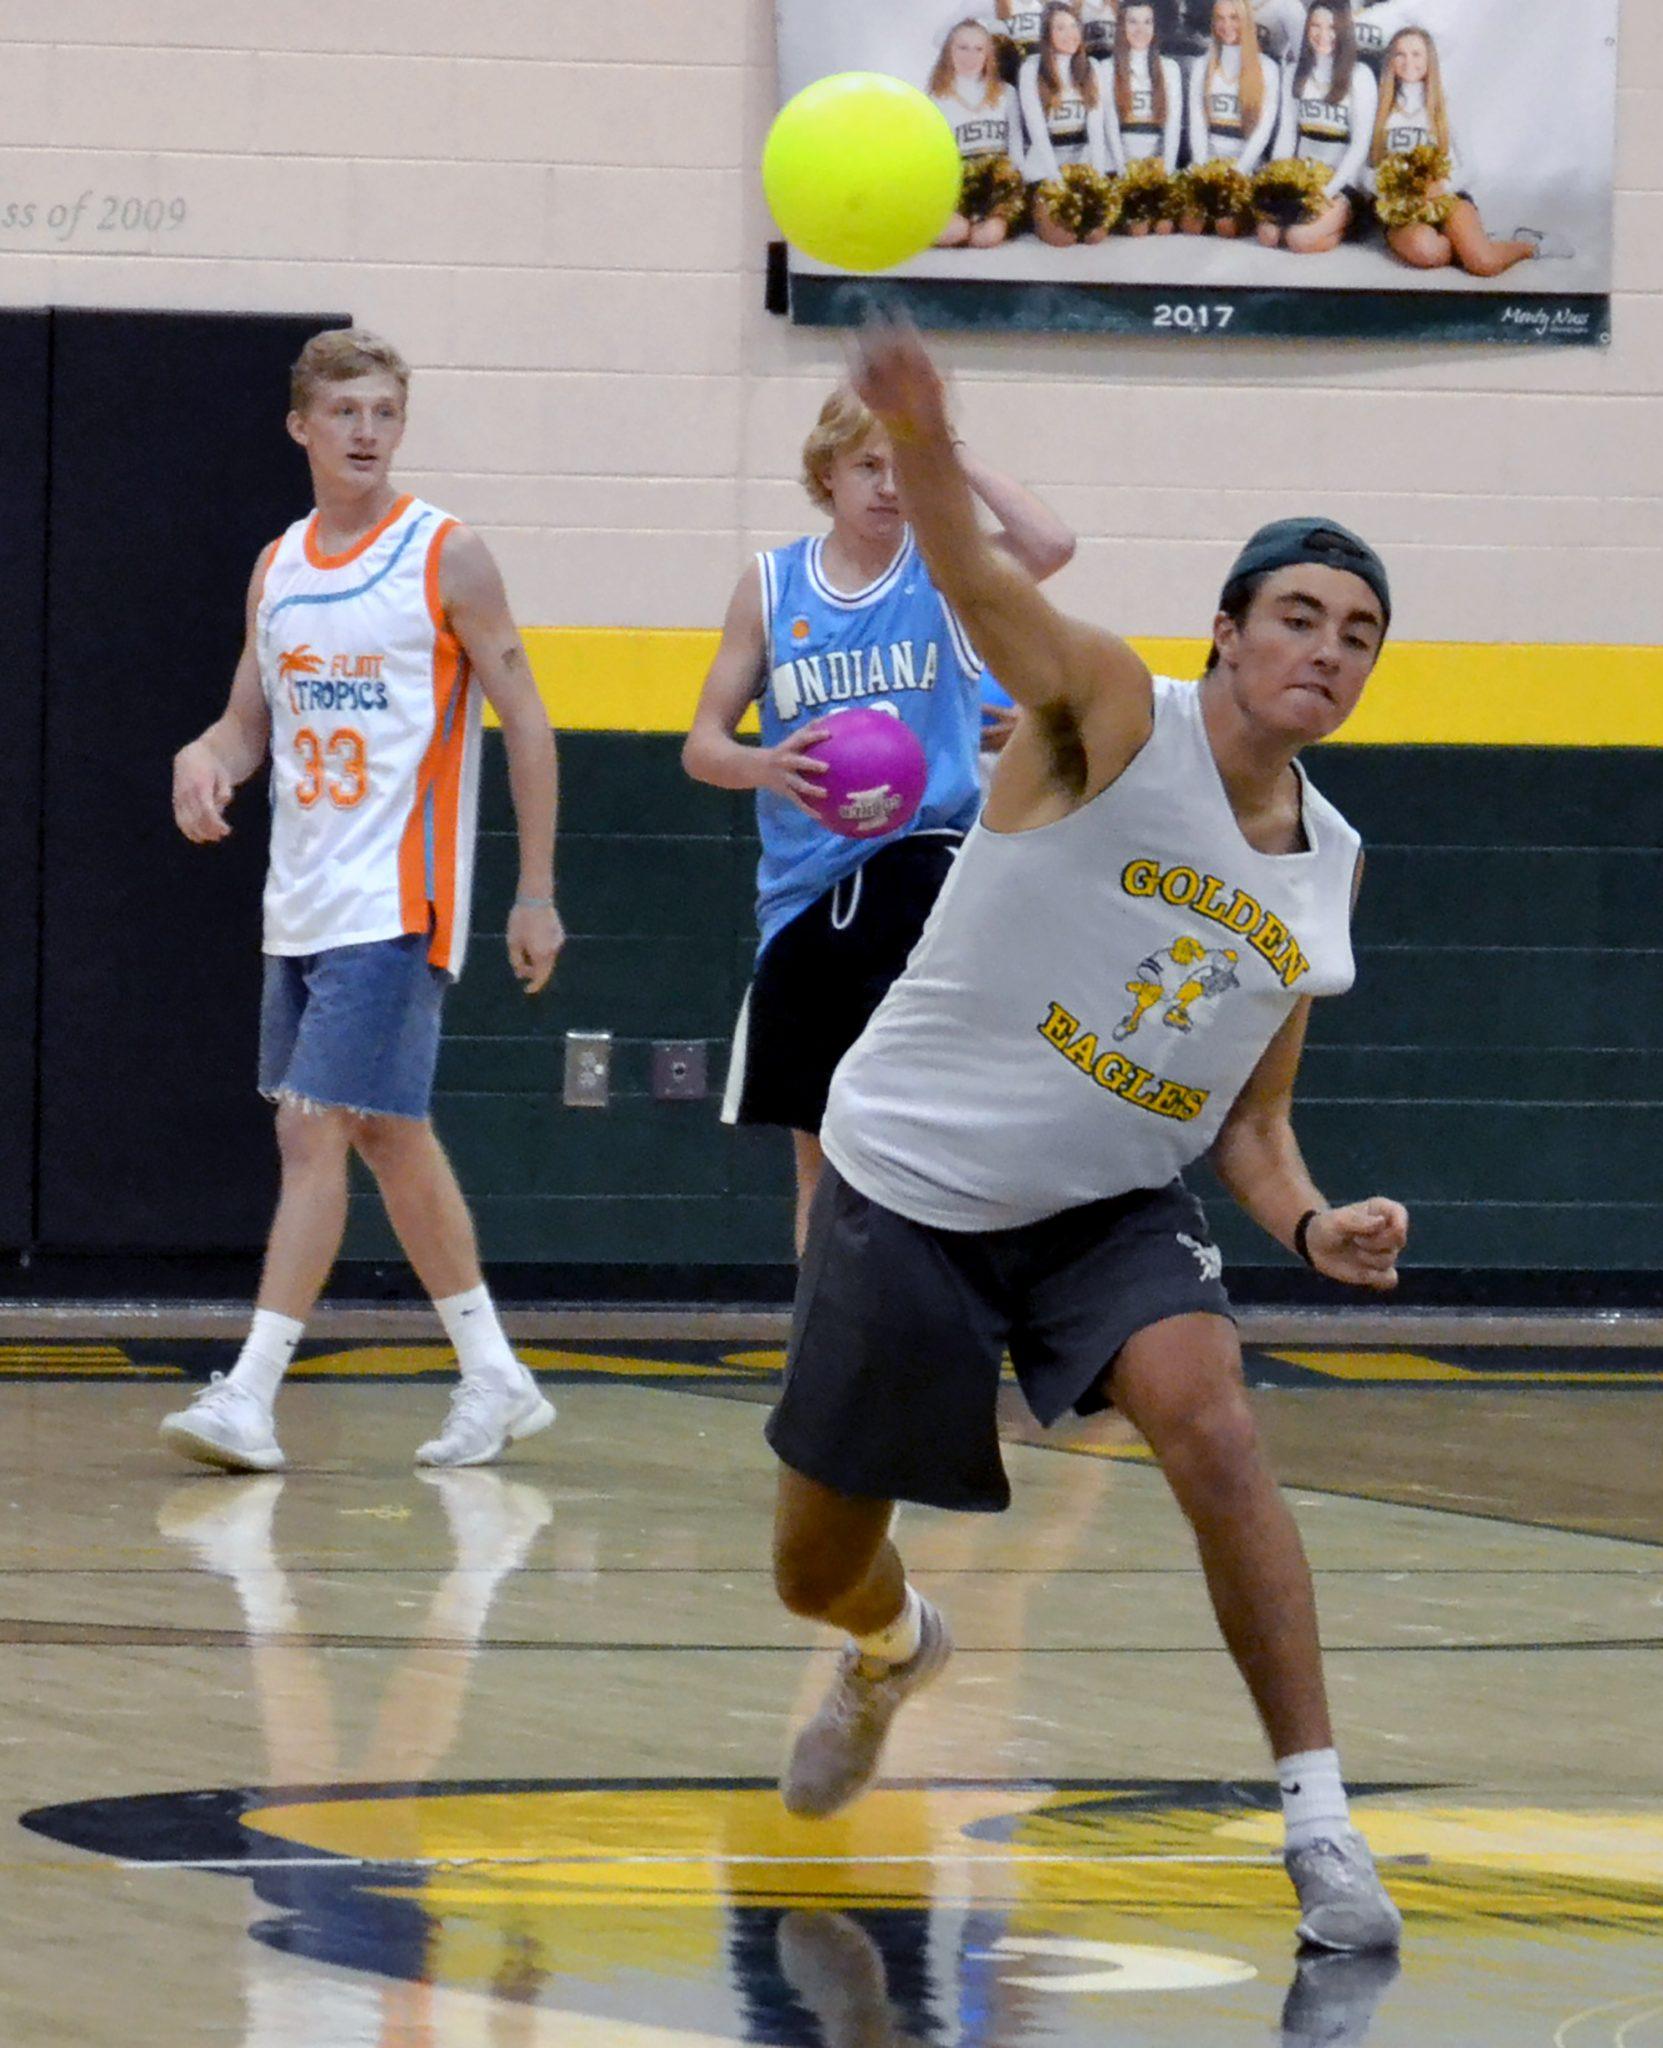 PHOTO+GALLERY%3A+Dodgeball